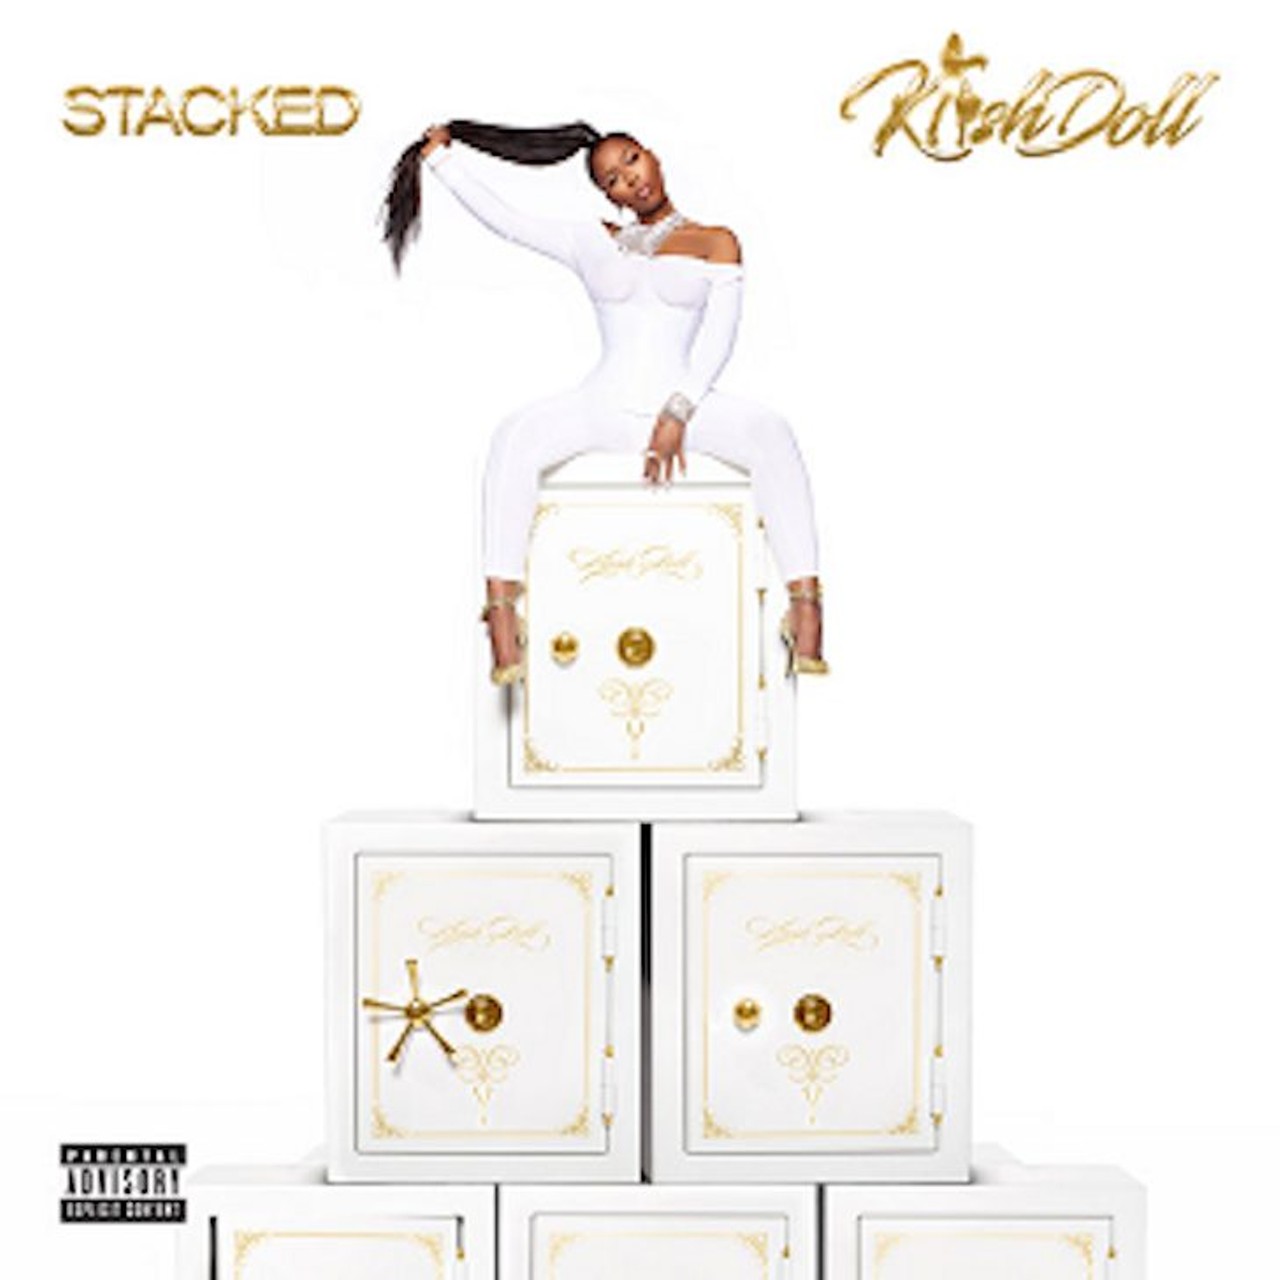 &#147;Ever since I was a seed, I ain't got nothin' free. Pops died on my b-day?'fore?I knew how?to speak. I'm the oldest of six?and they countin' on me, had to get in these streets, just to eat for a week.&#148; - Kash Doll, &#147;KD Diary&#148; from Stacked
Photo via Spotify